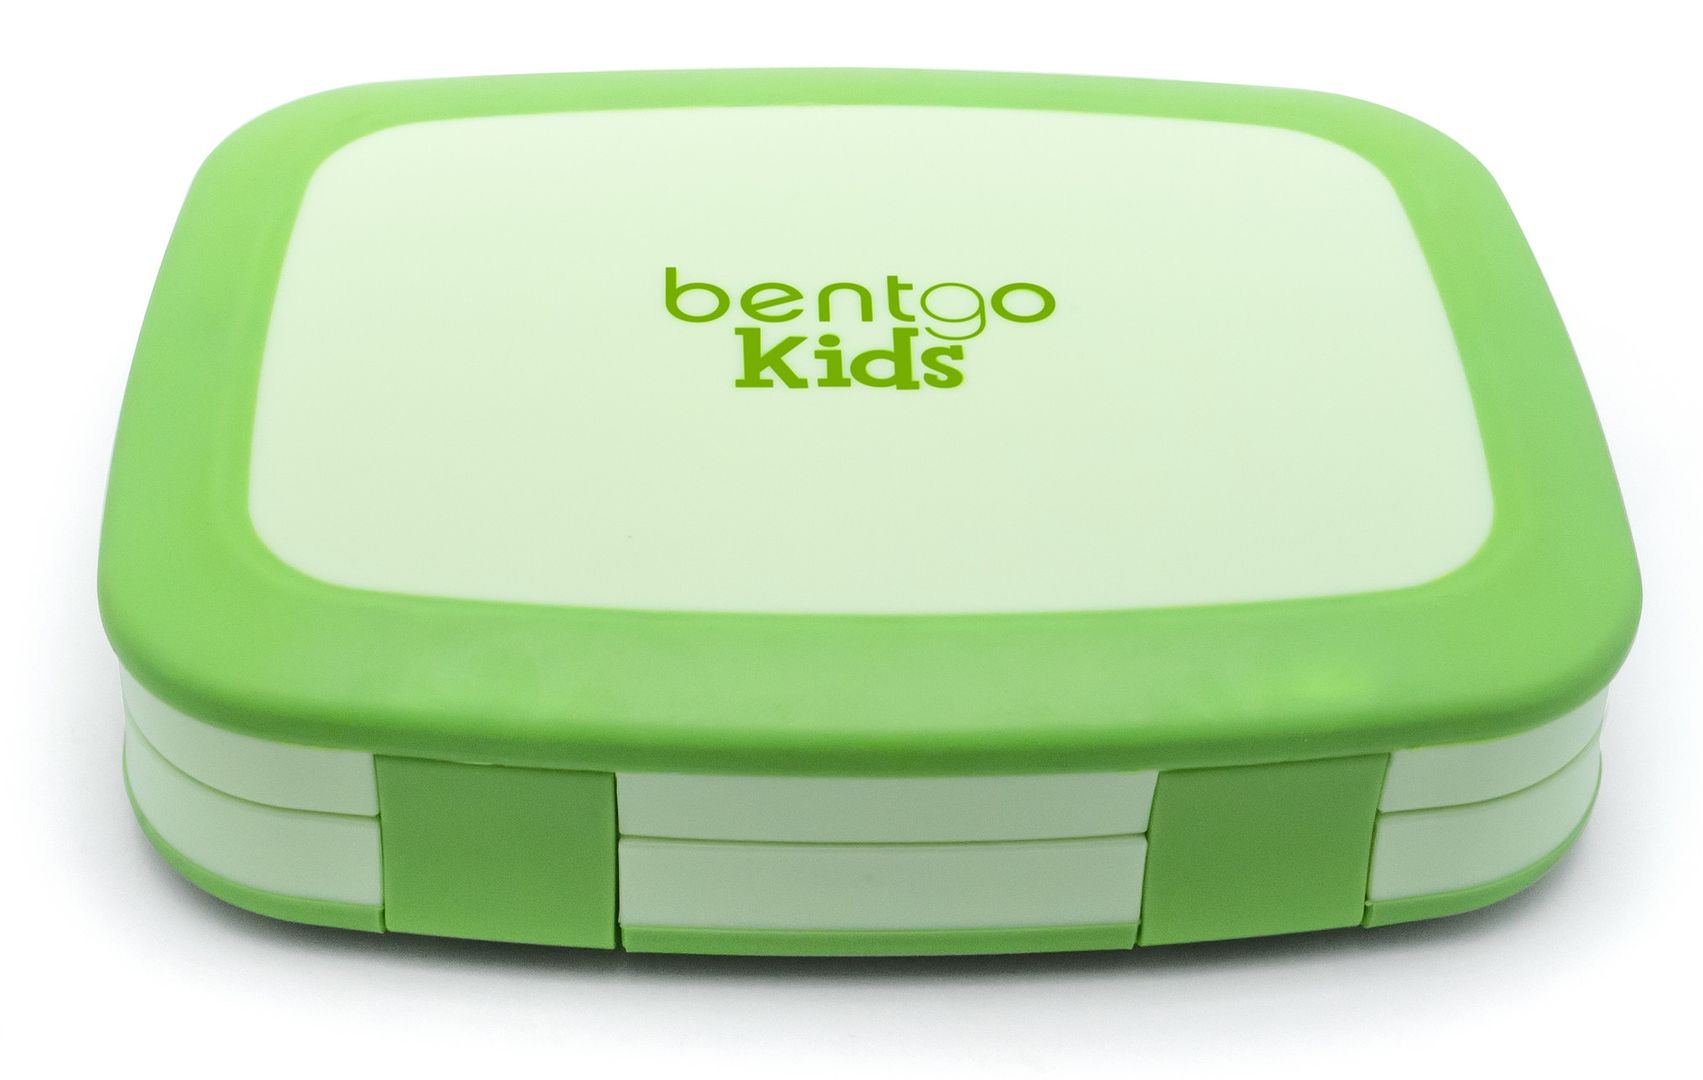 Bentgo Lunch Box for kids: Easy to clean, pack, and keep food separated